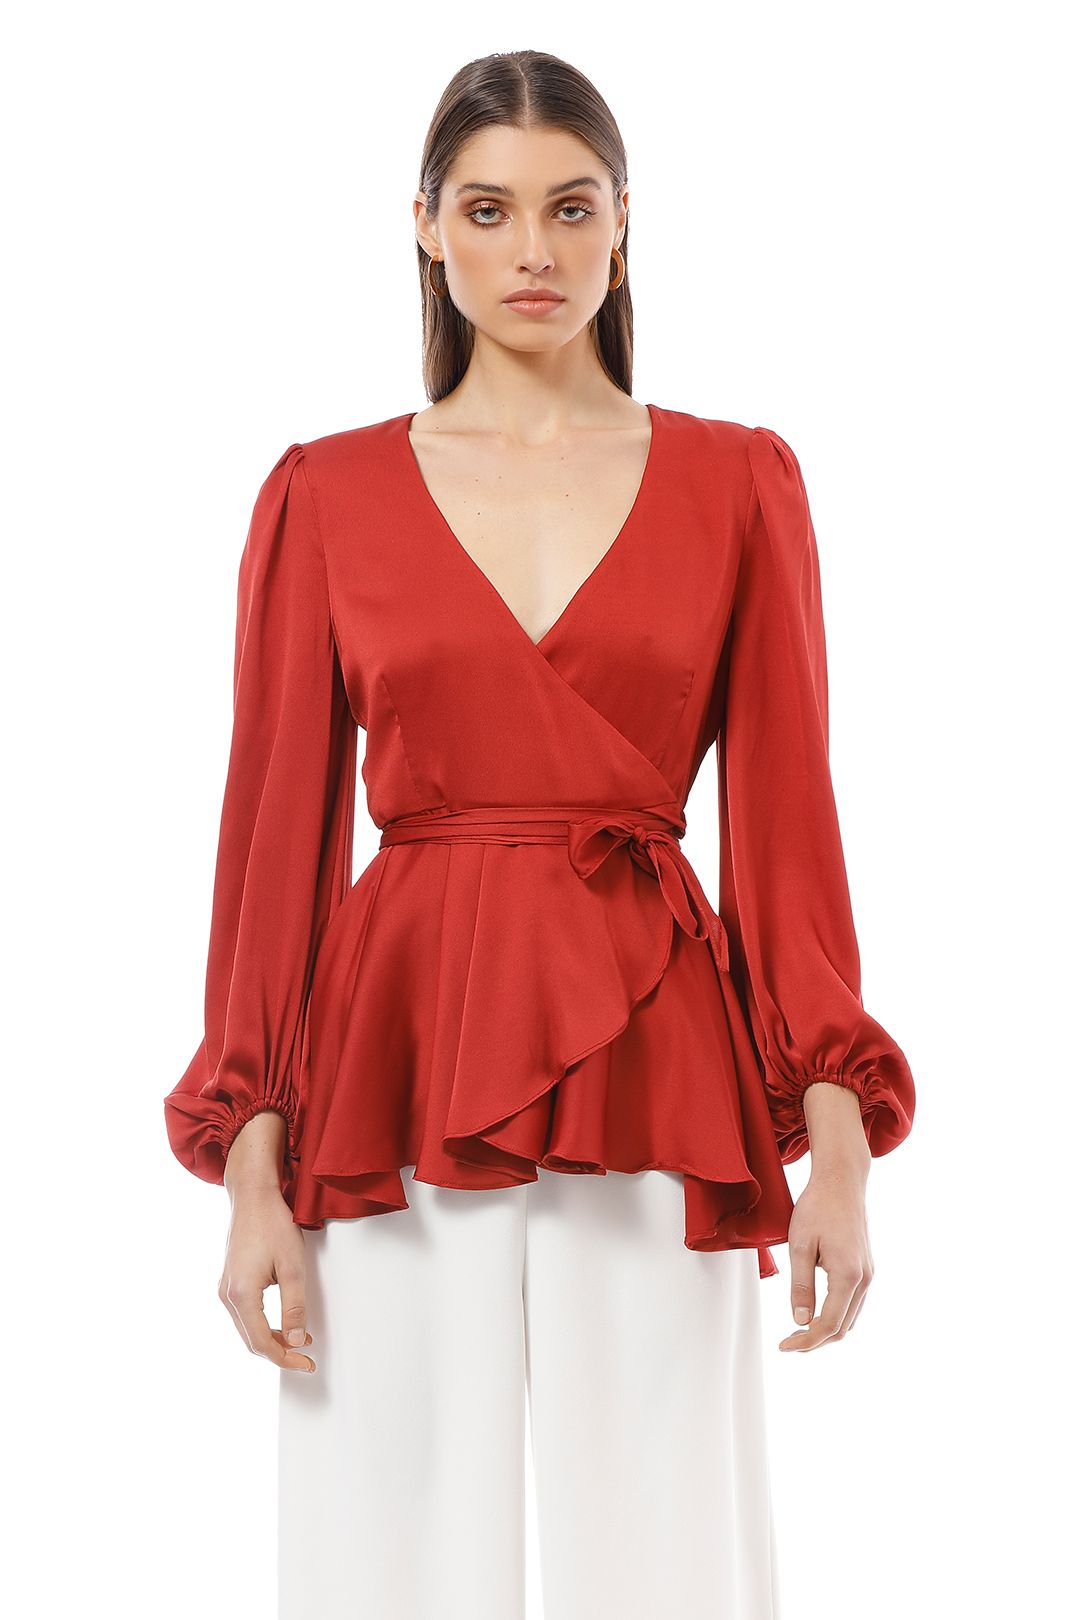 Shona Joy - Anna Puff Sleeve Wrap Blouse - Red - Front Detail